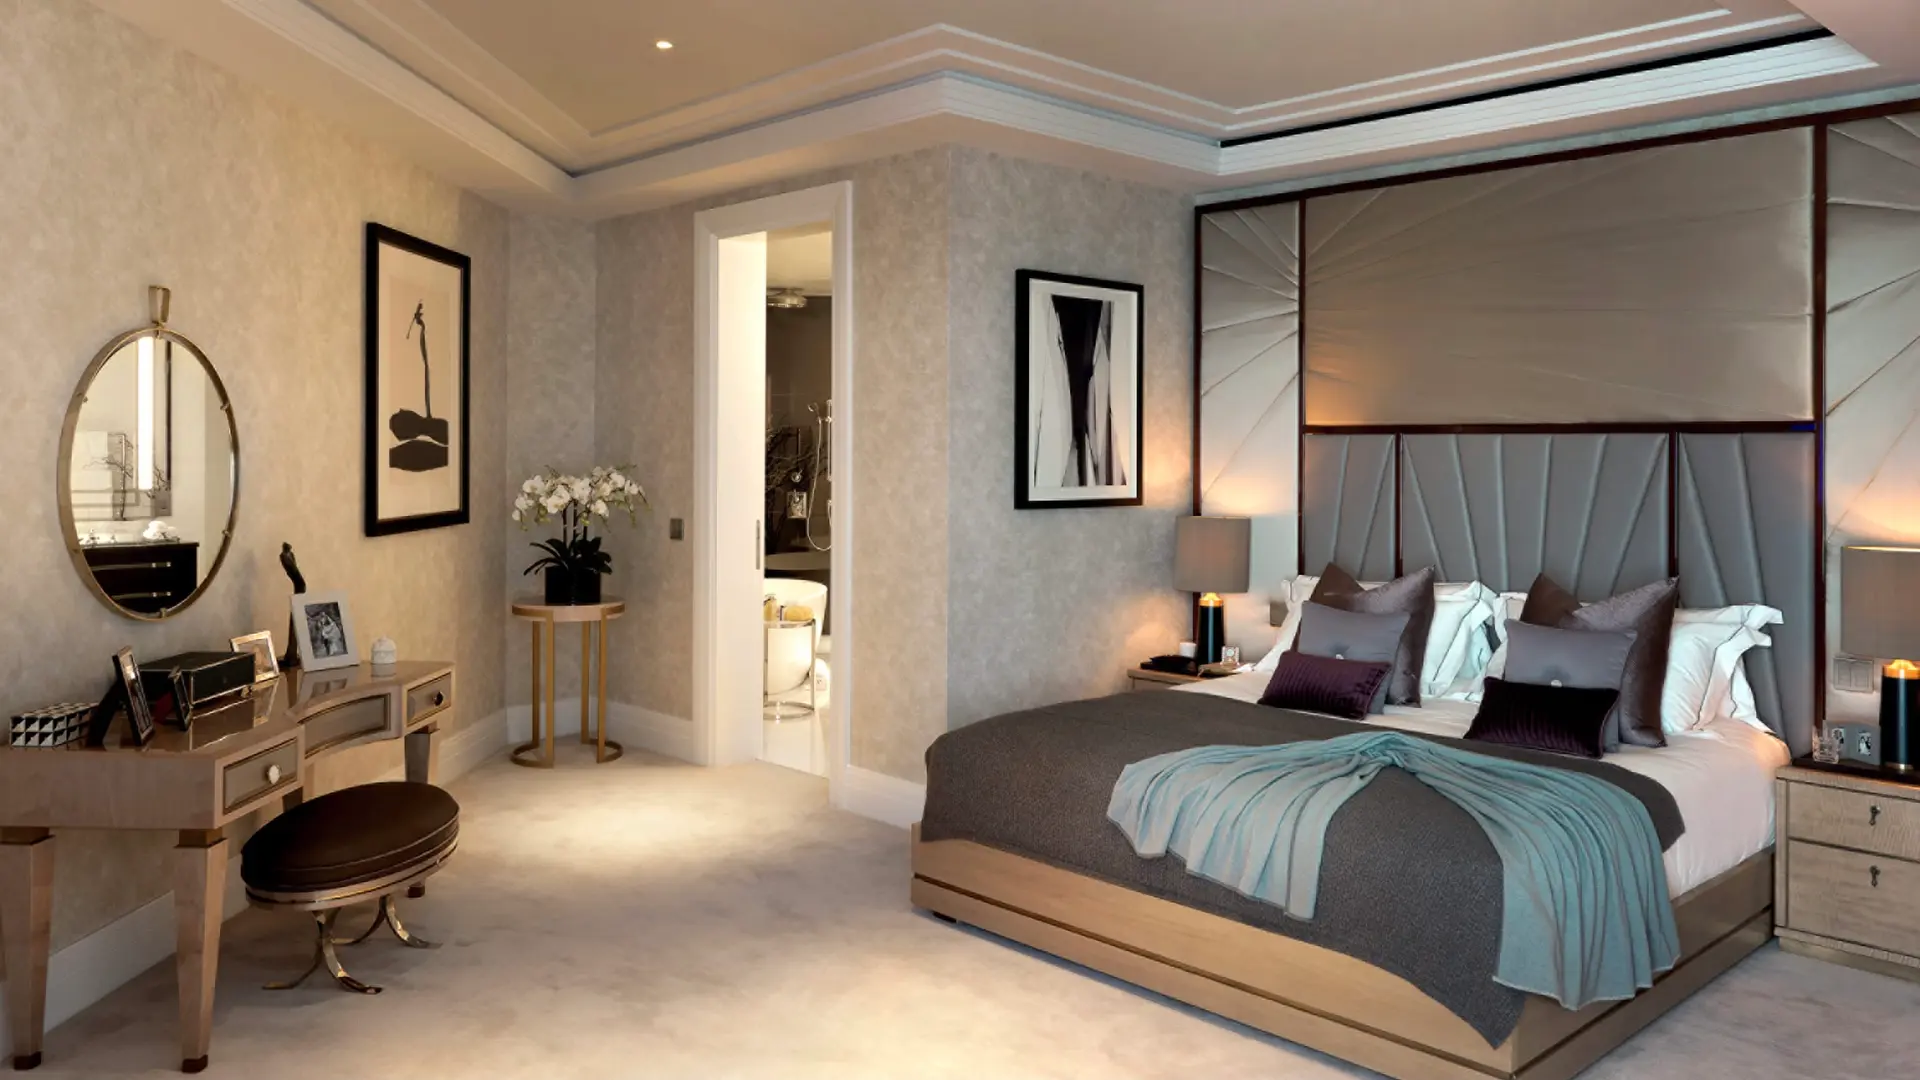 Hotel review Accommodation' - Four Seasons Hotel London at Ten Trinity Square - 5